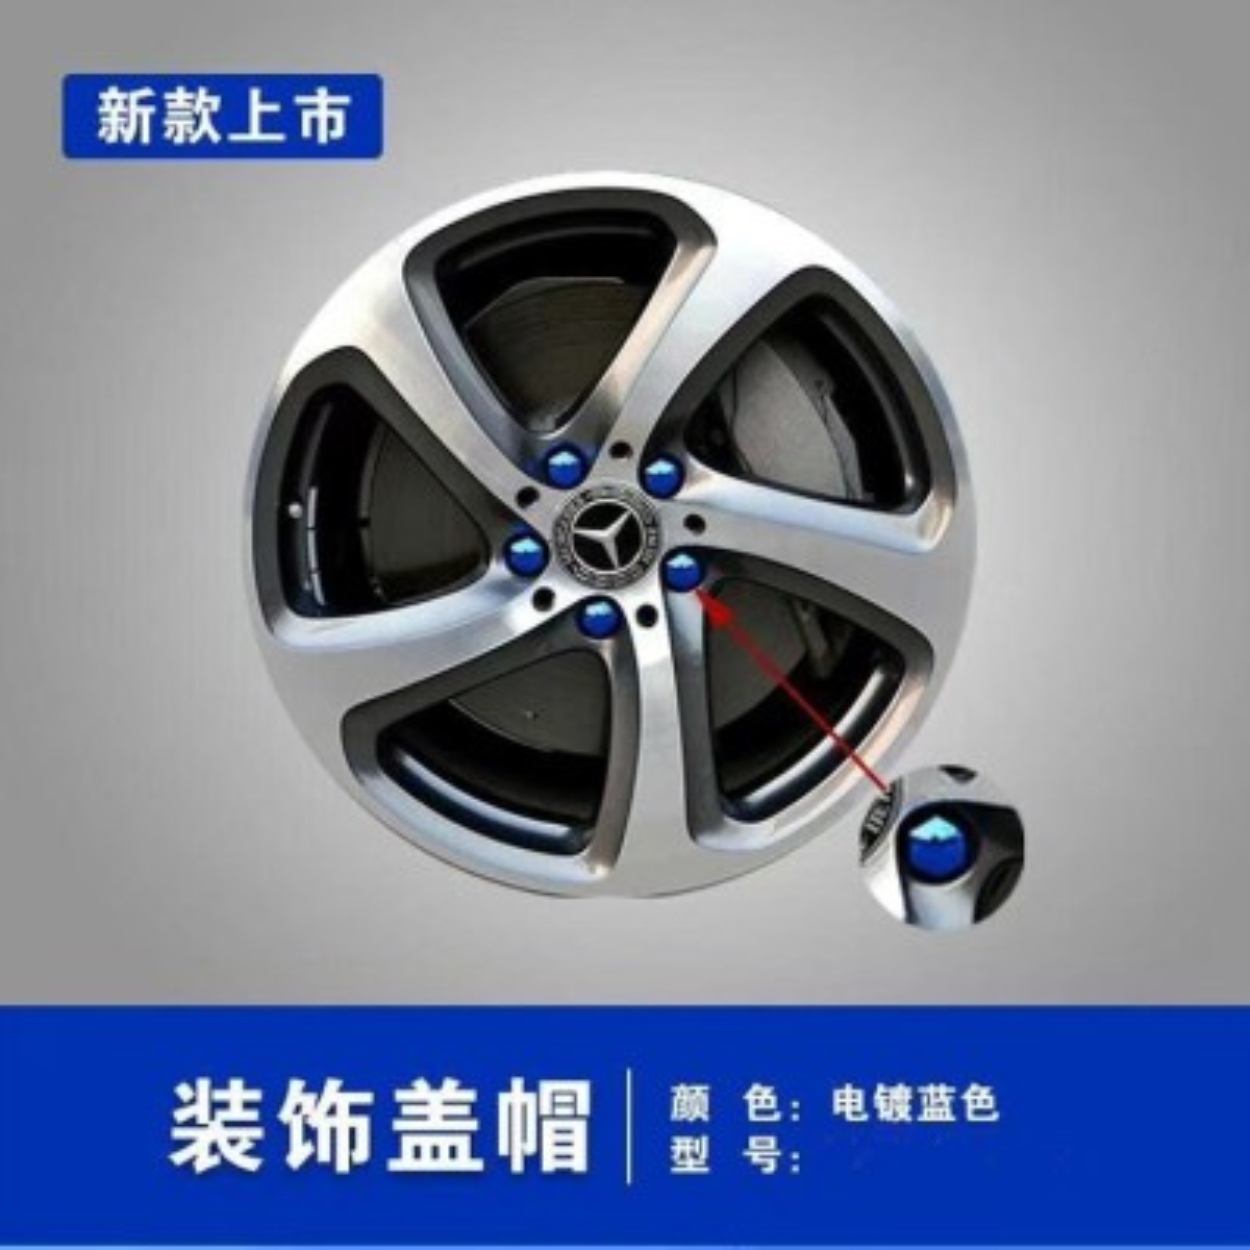 ♨✜  Put rong is suitable decoration to the screw cap dustproof Toyota rav4 roller color tire cap buckle hub saving cover